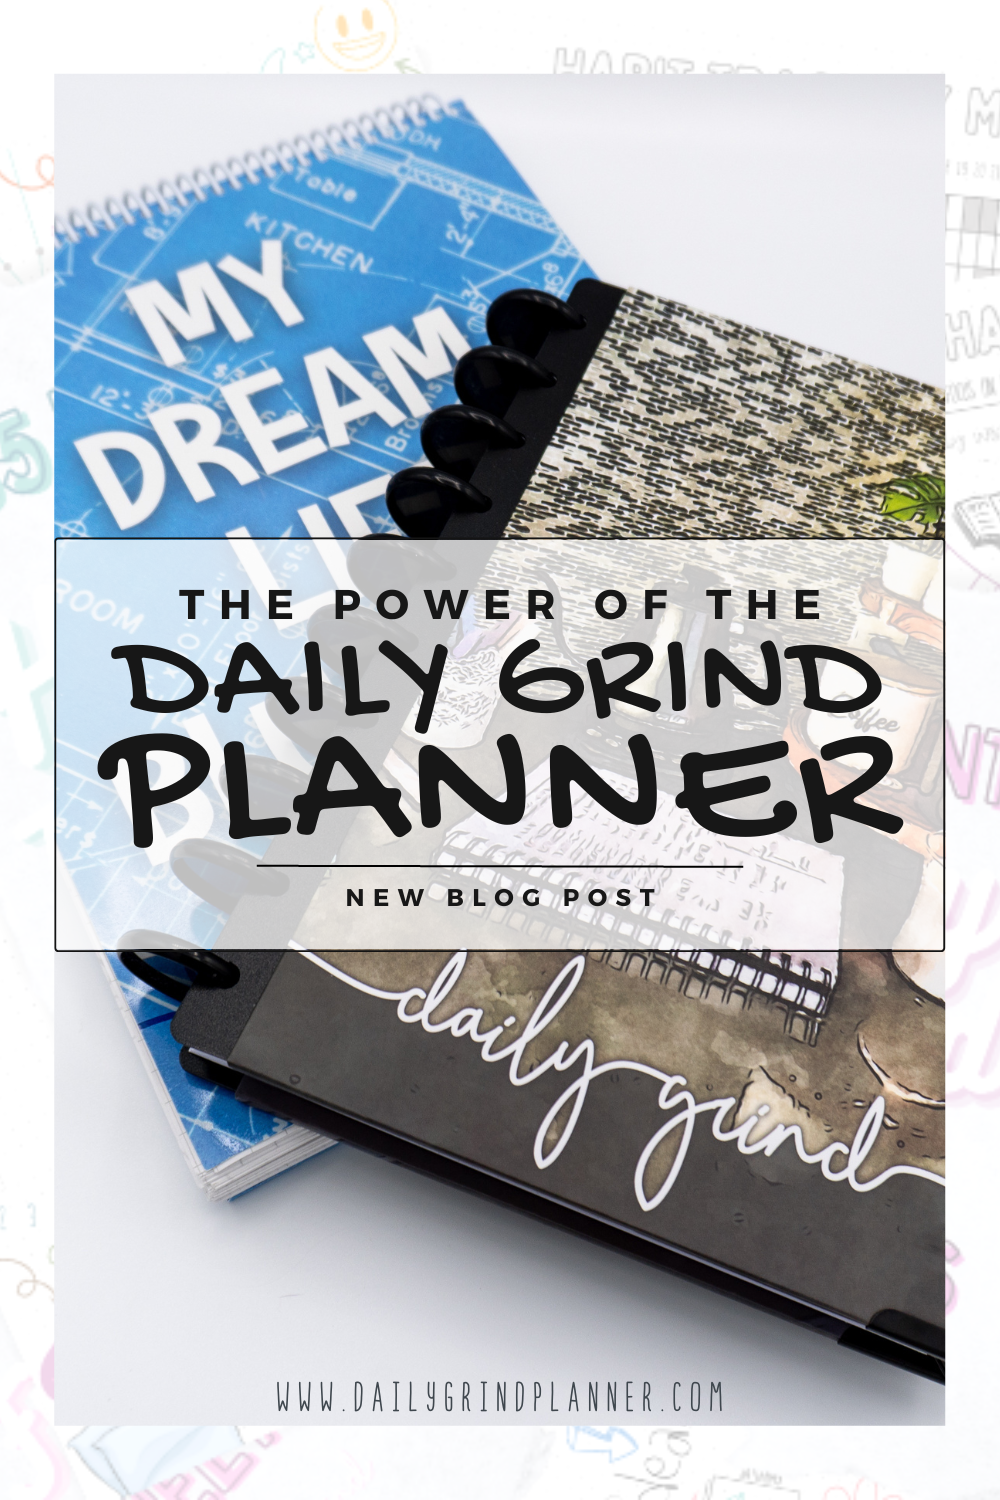 THE POWER OF THE DAILY GRIND PLANNER